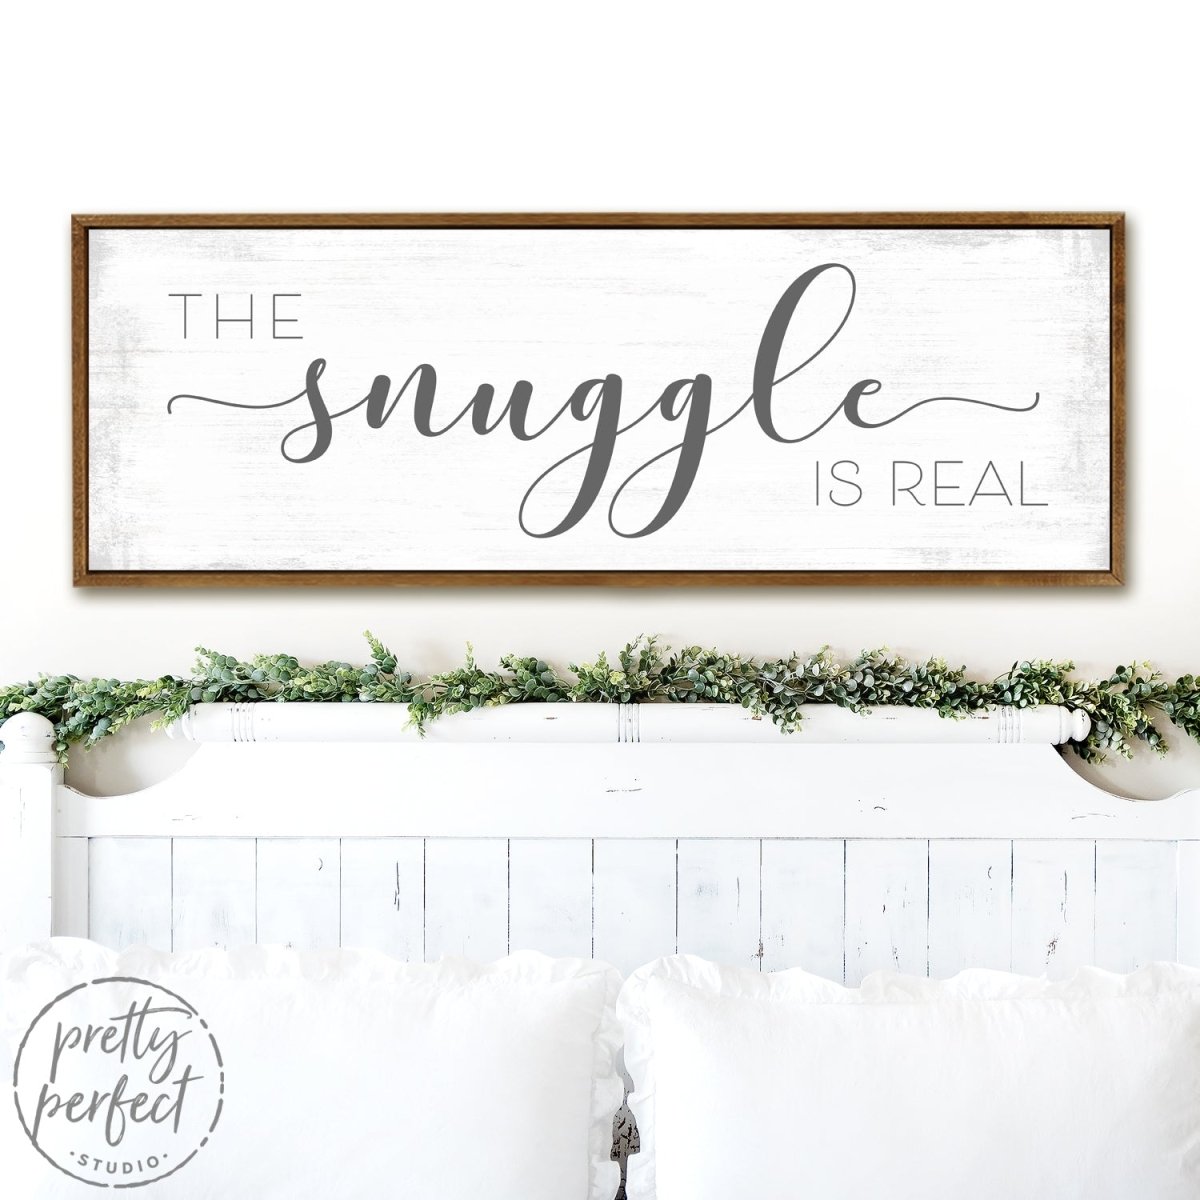 The Snuggle Is Real Sign in Bedroom - Pretty Perfect Studio